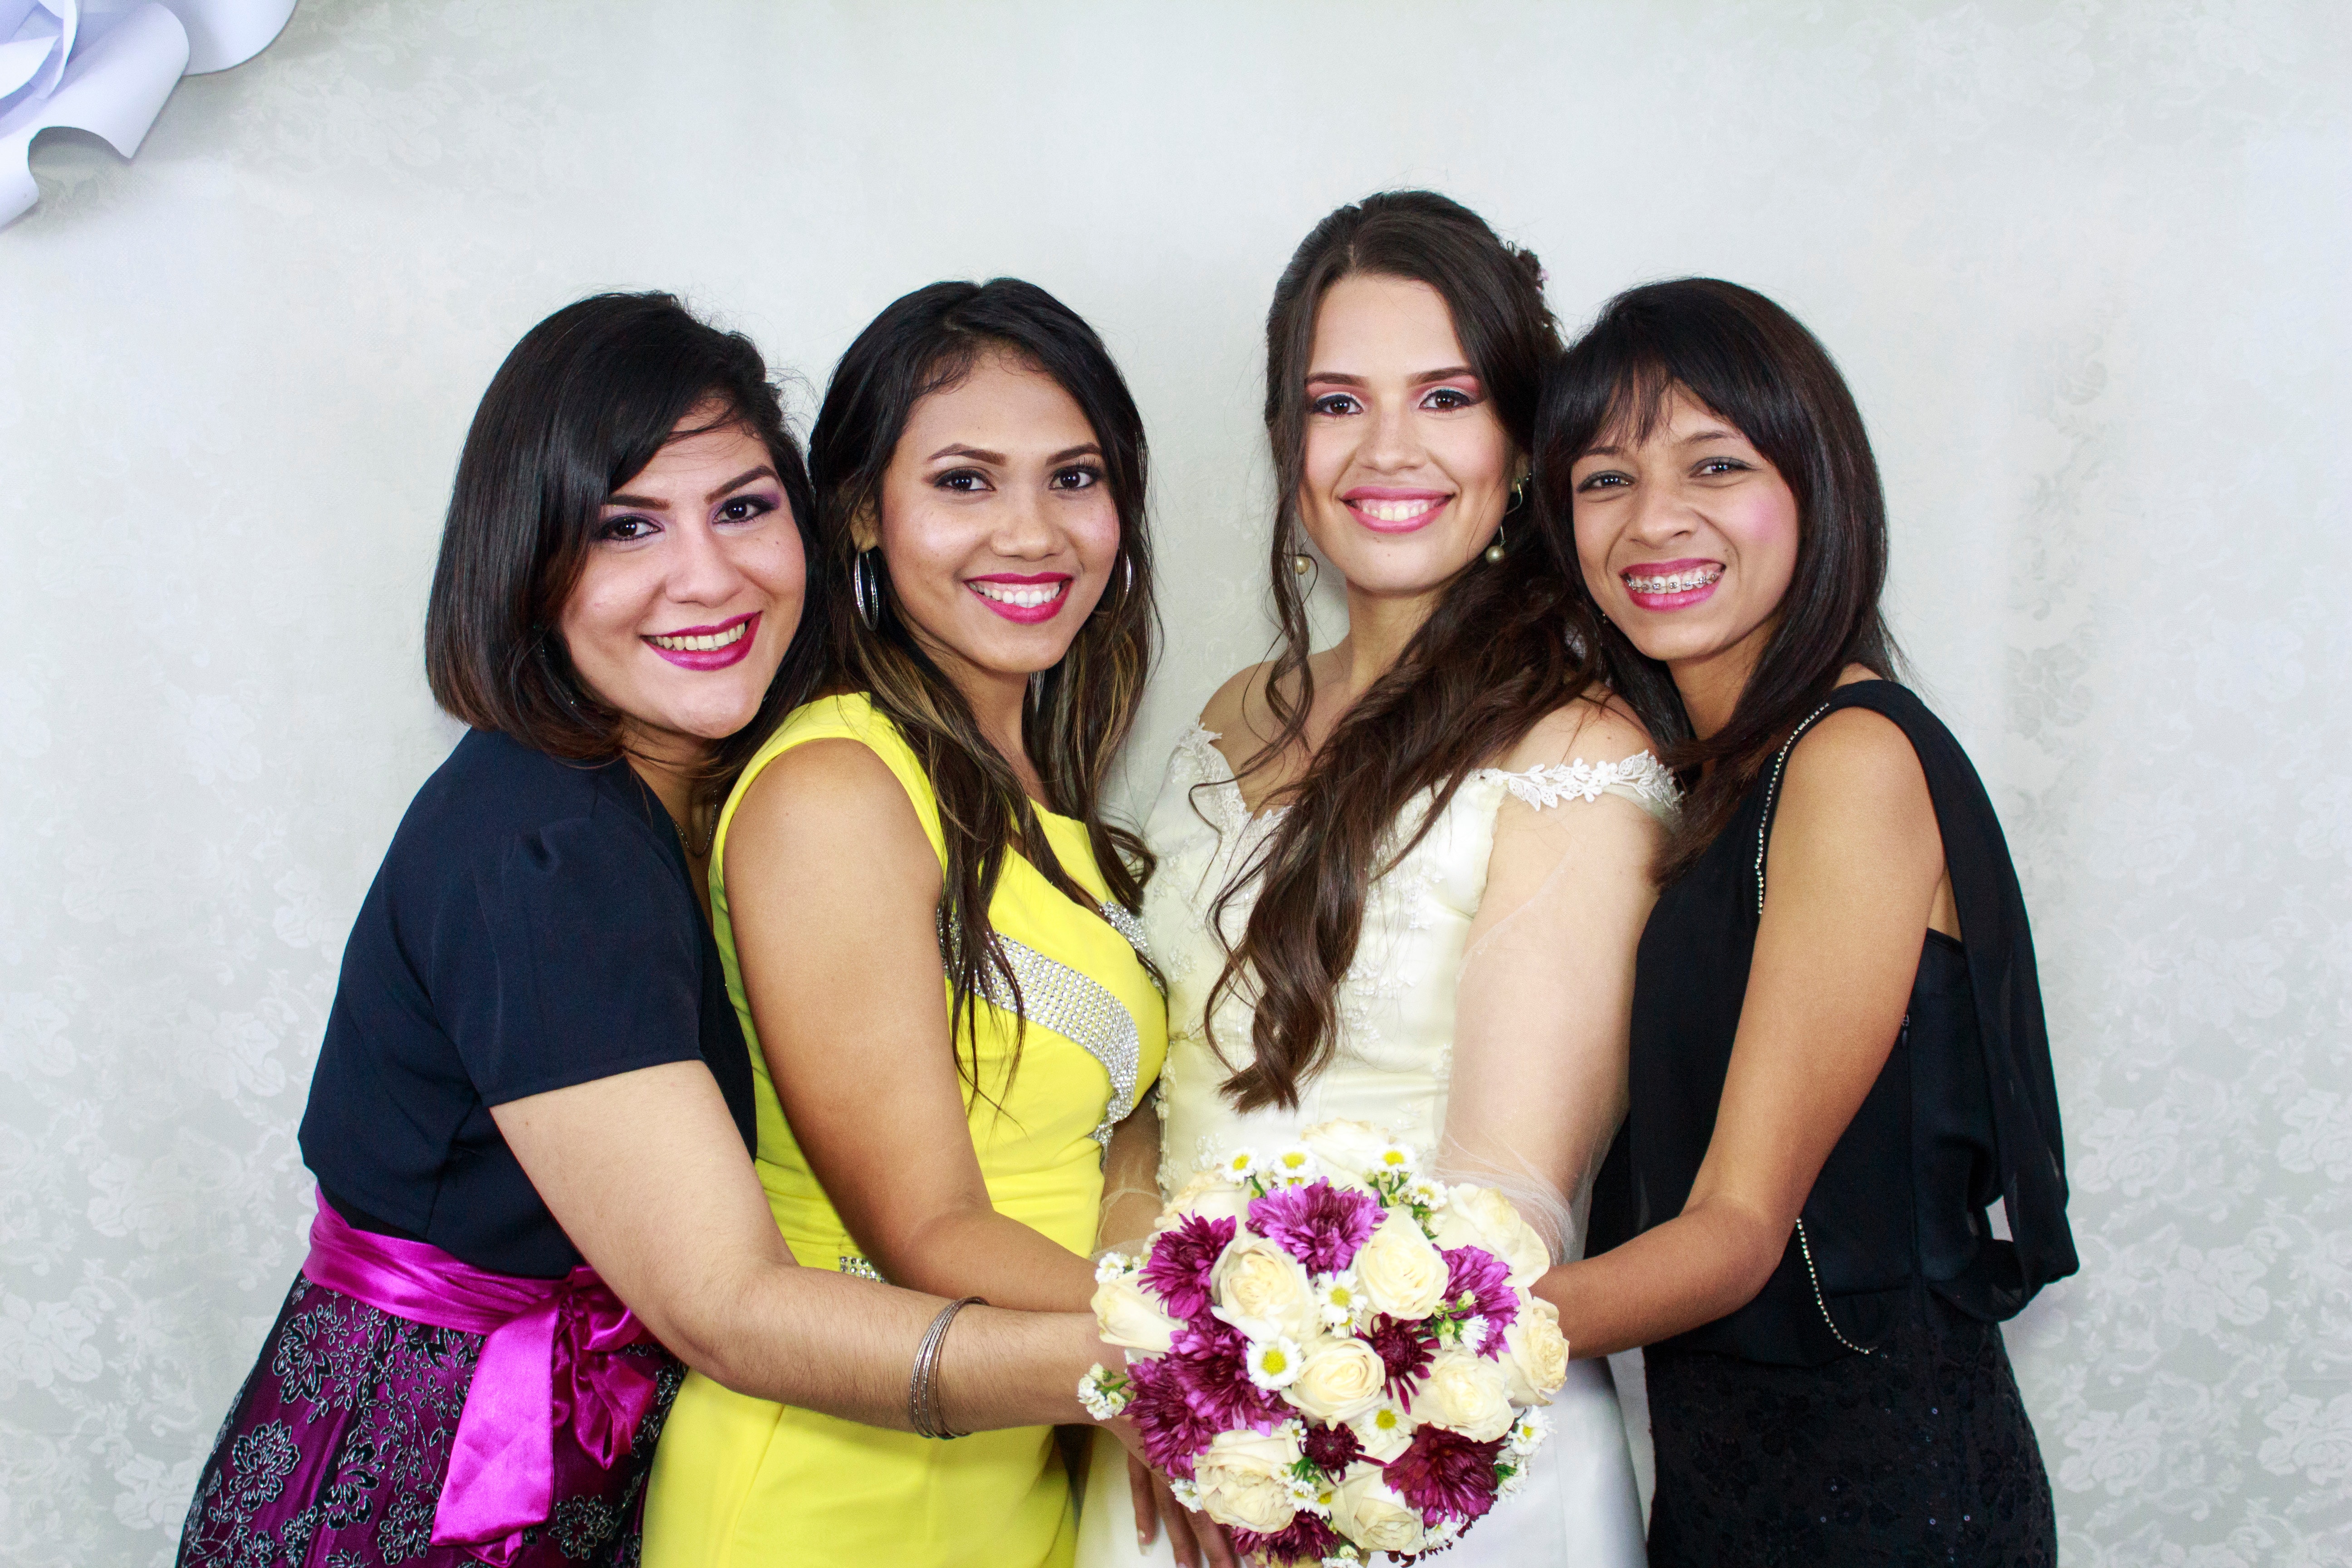 Woman in beige wedding dress holding bouquet flower together with other three woman in assorted colors of dresses photo